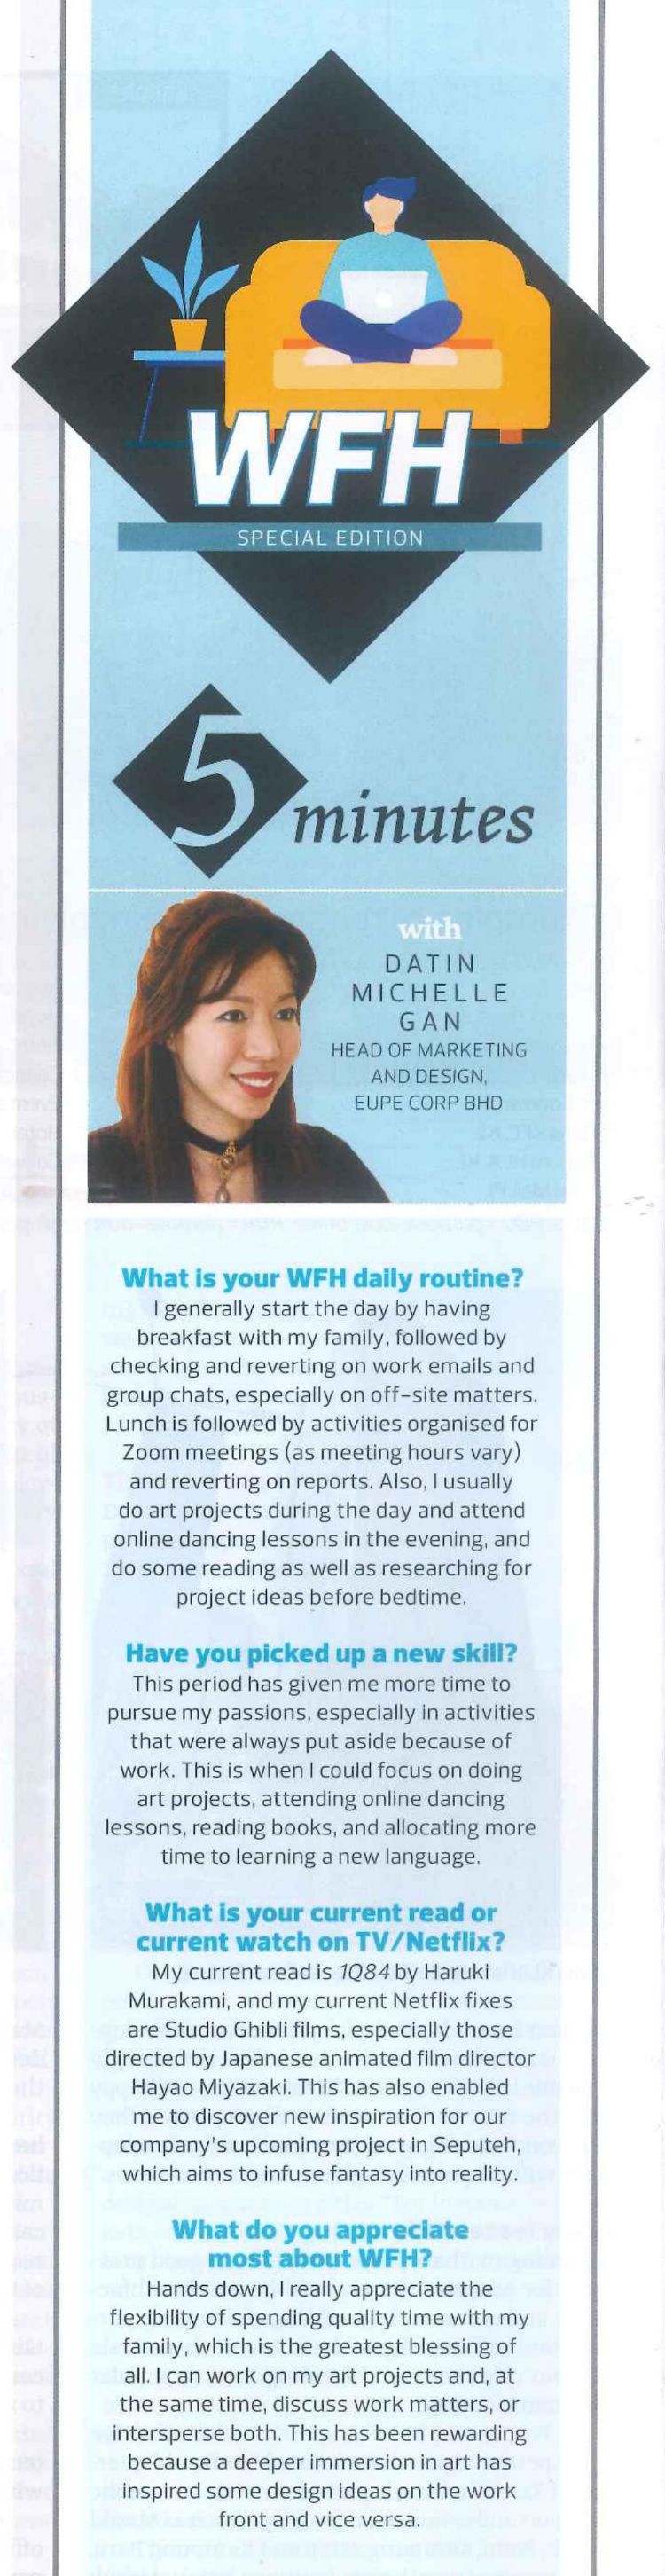 The Edge : Work from Home Special Edition with Datin Michelle Gan